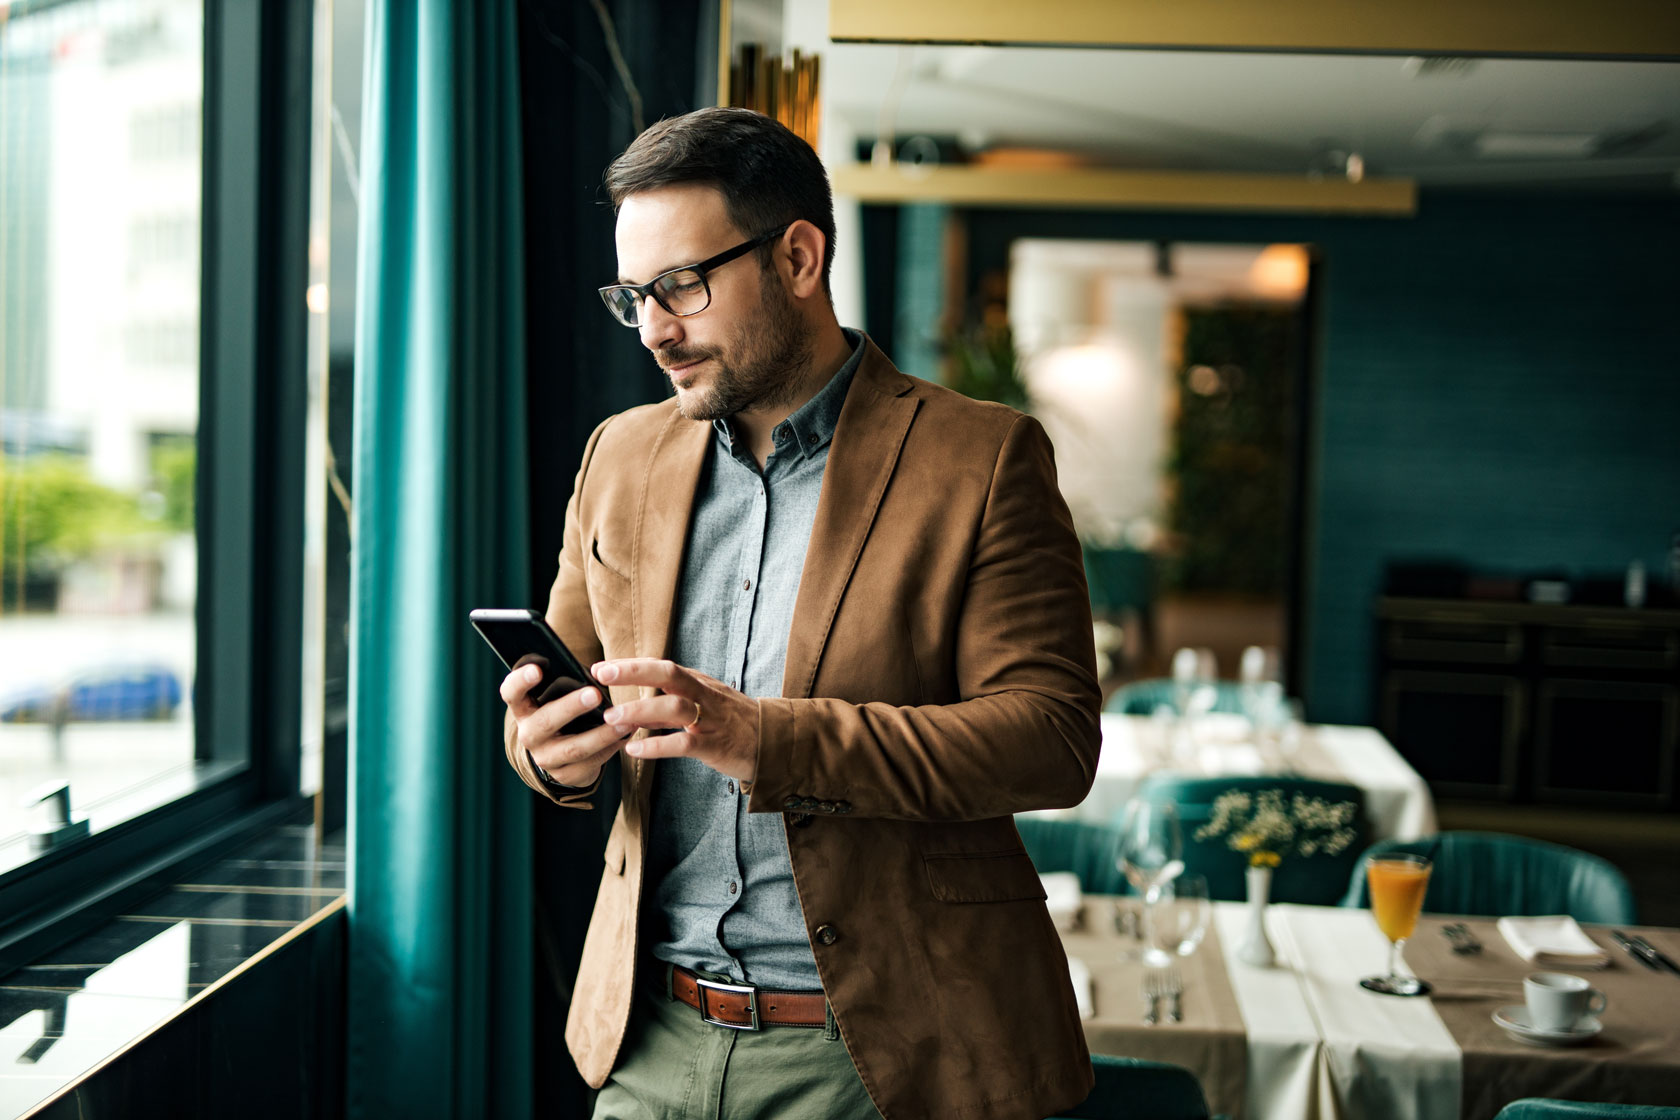 Finance consultant checking his phone while standing in a restaurant